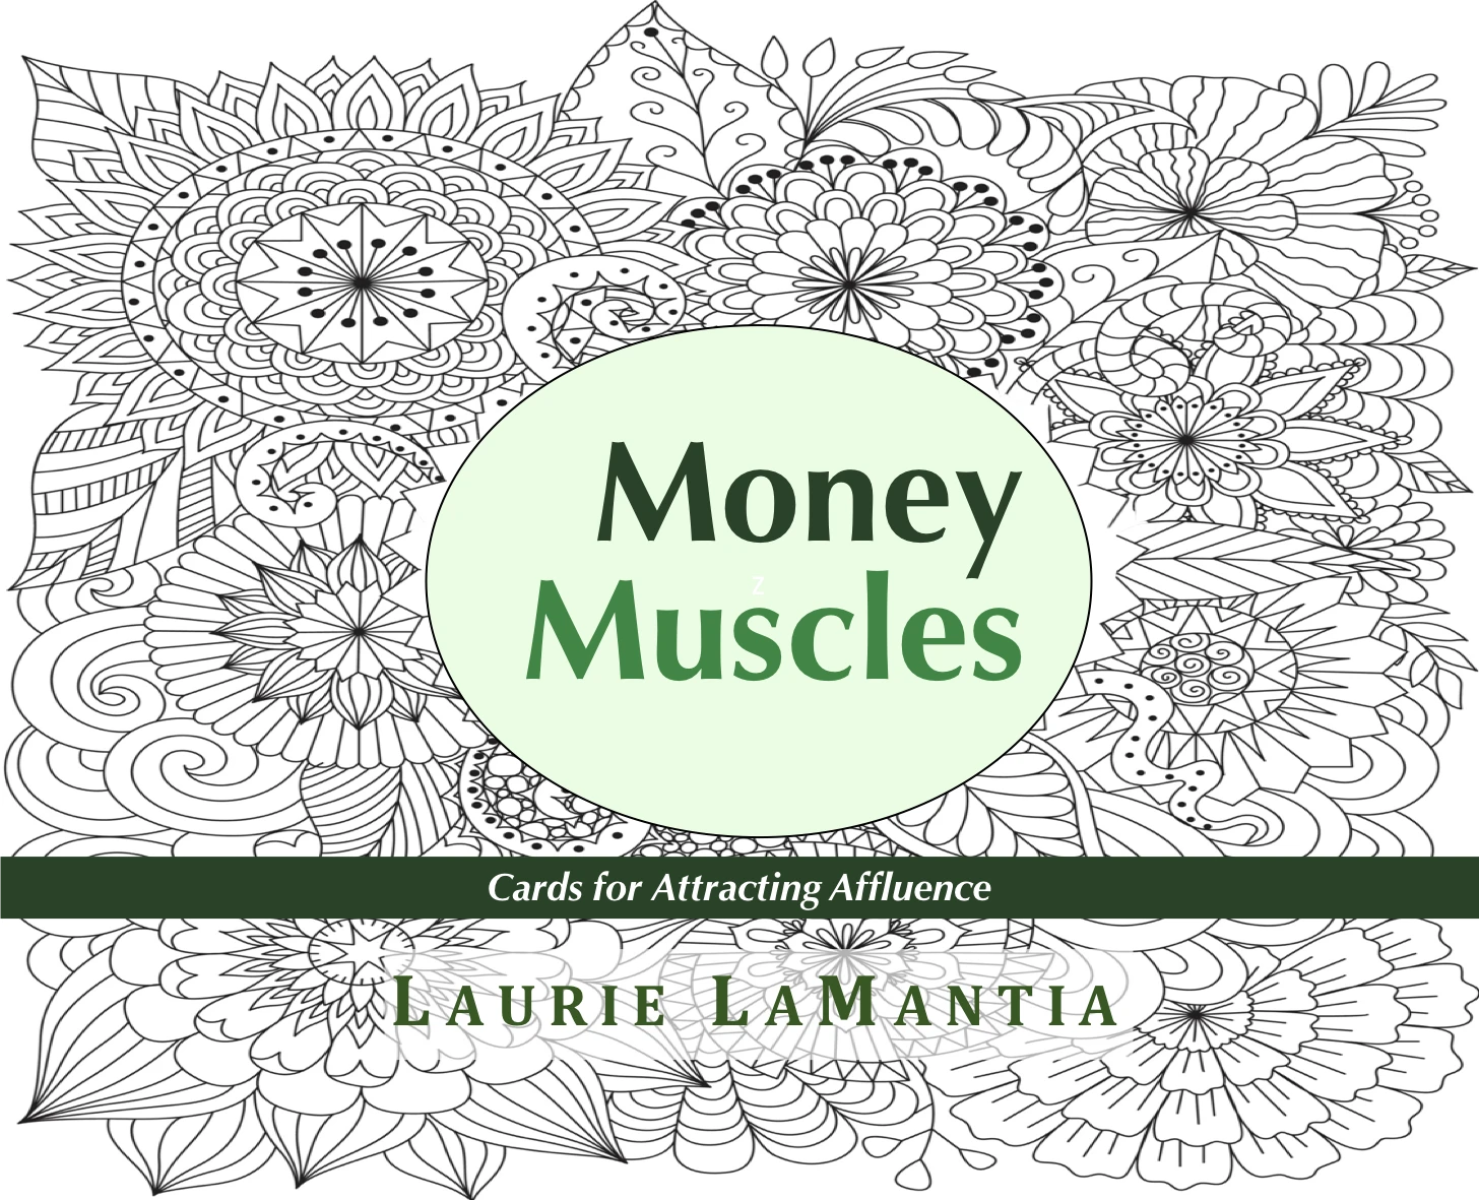 Money Muscle Card Deck - Building the mental muscles for attracting affluence